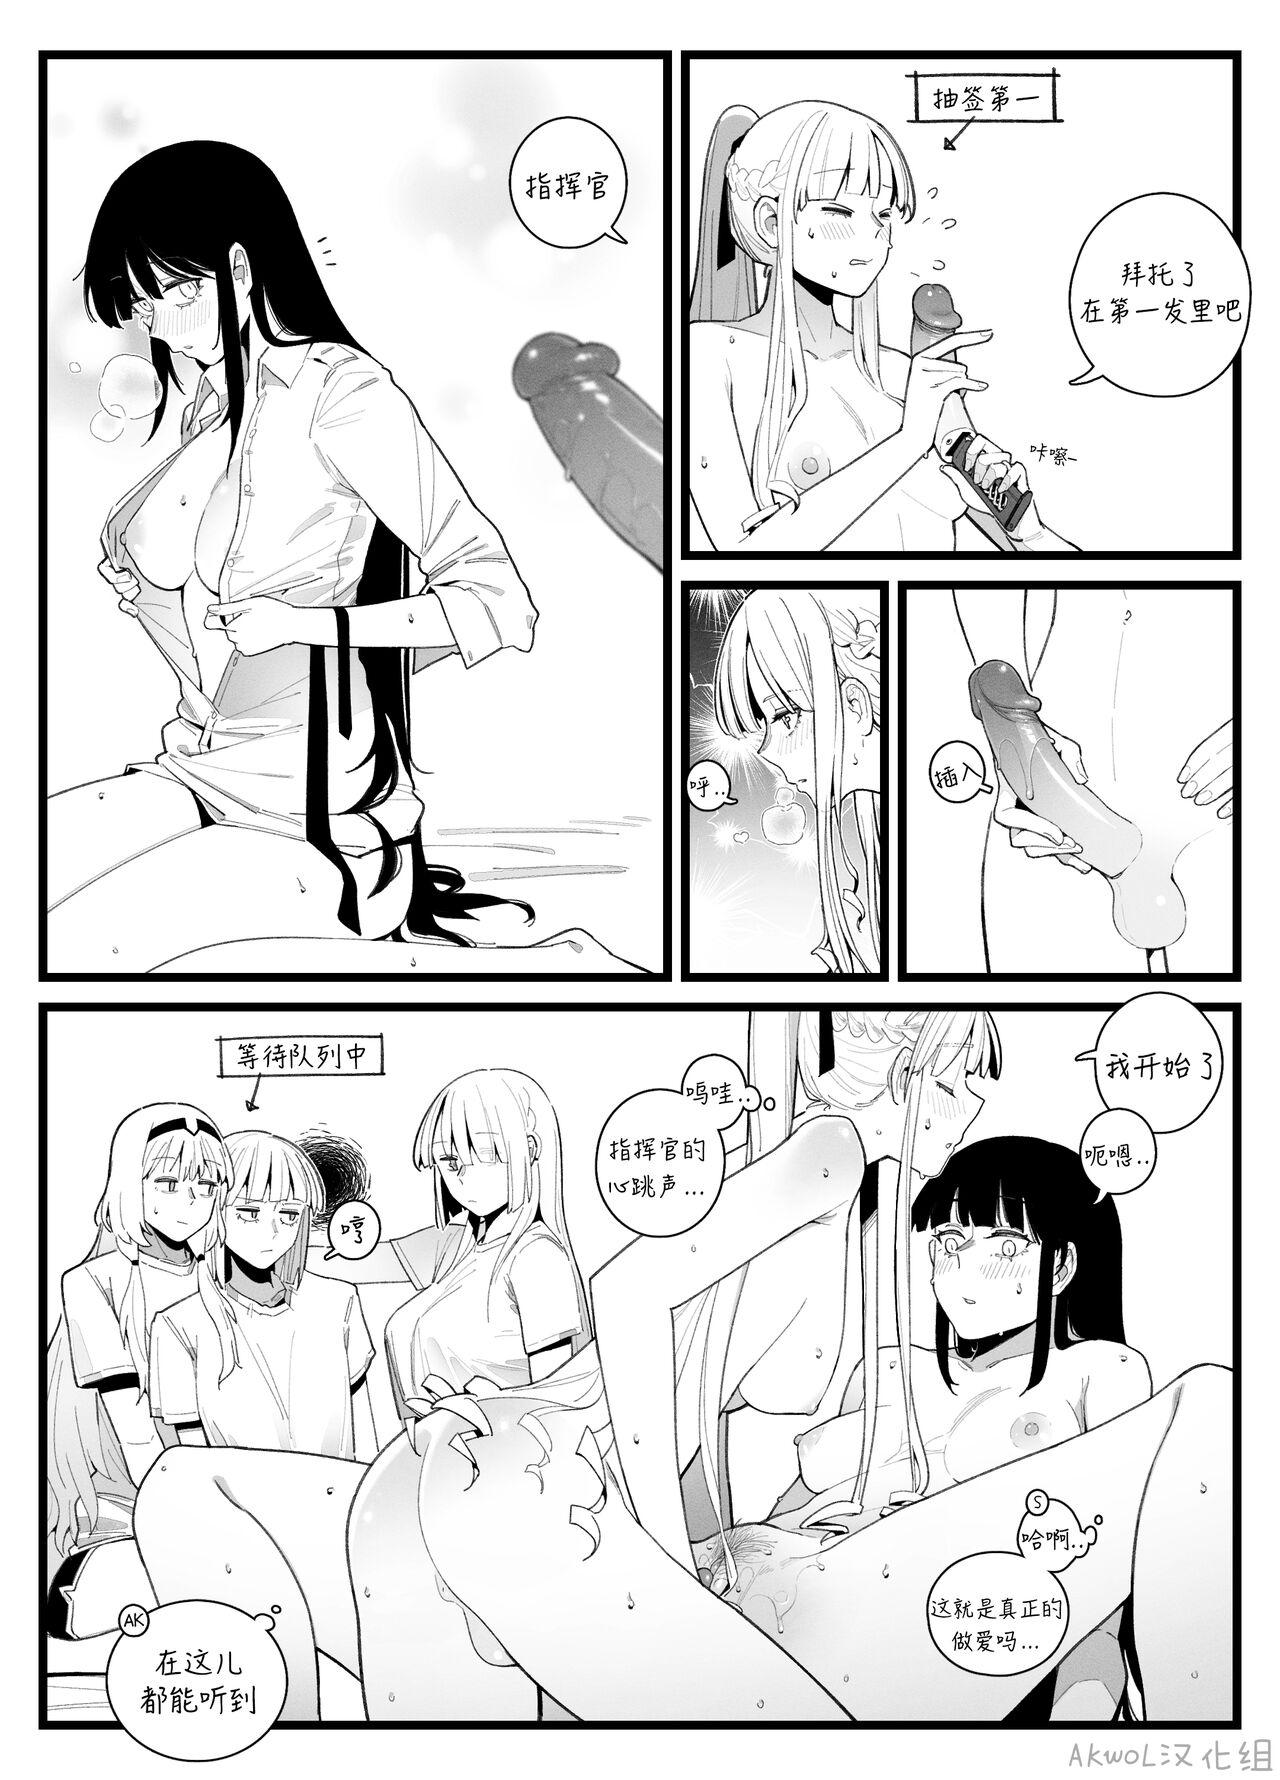 Consolo Pregnancy part2 - Girls frontline Gay Trimmed - Page 2